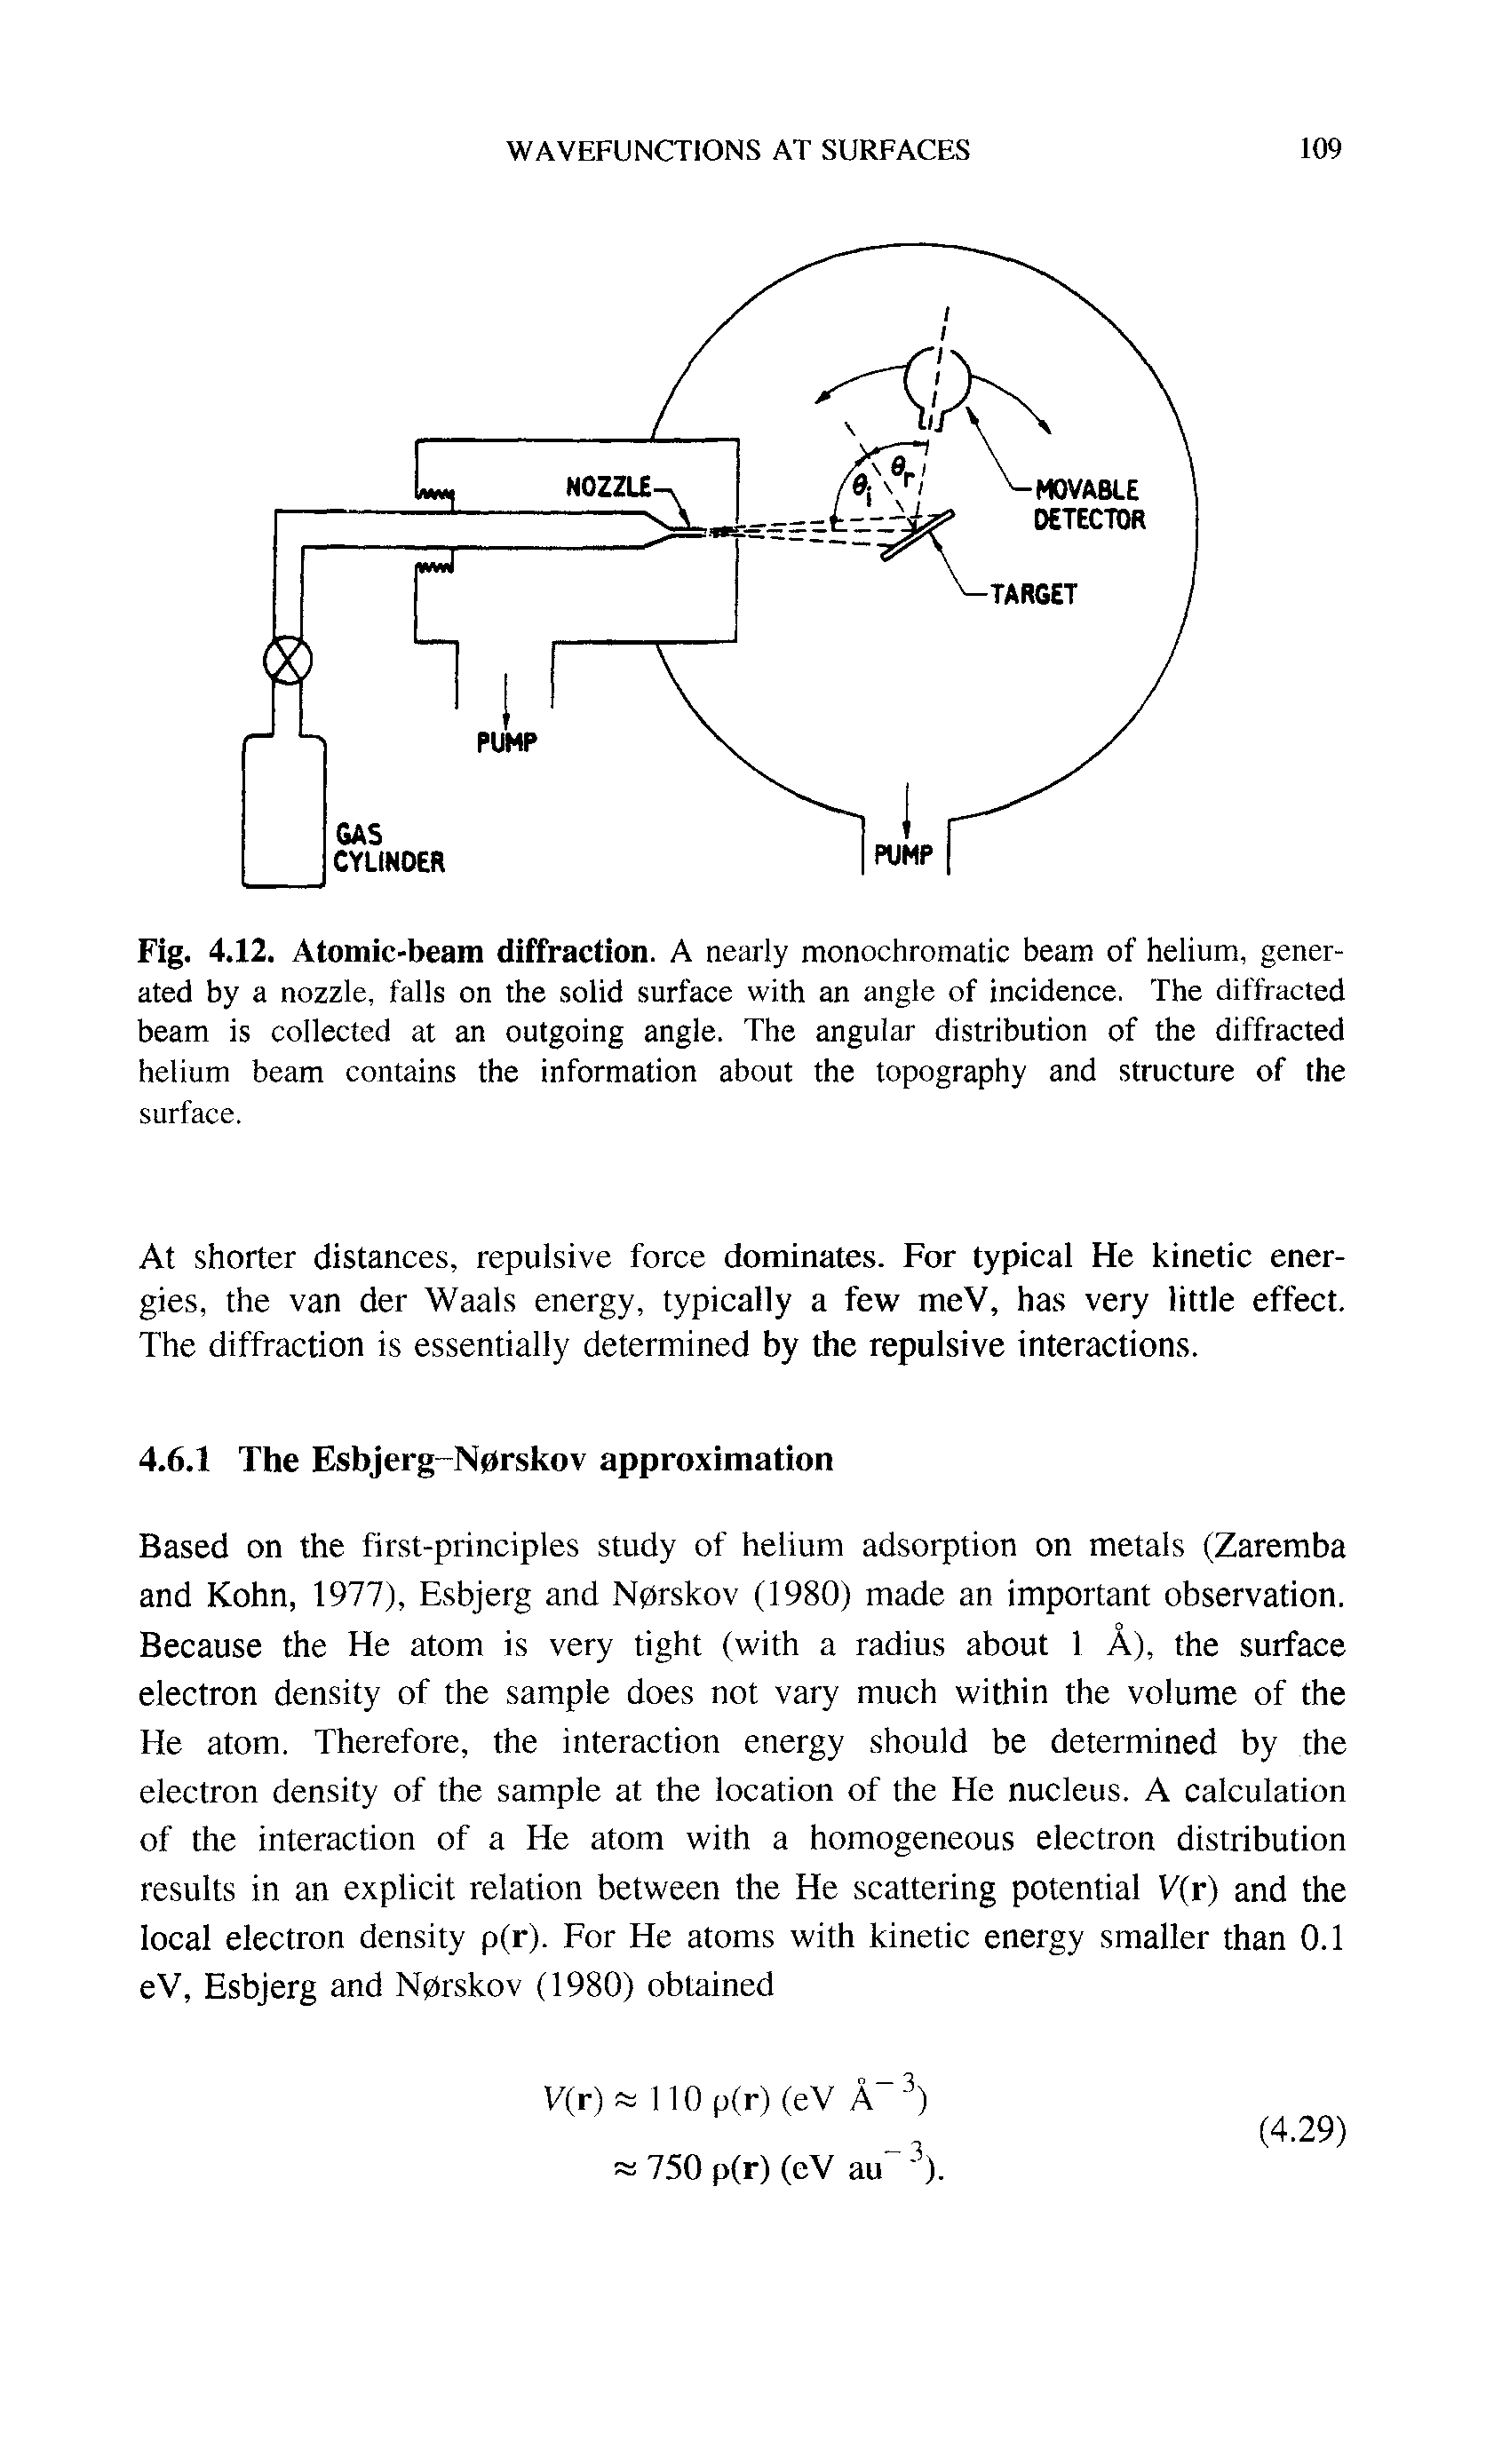 Fig. 4.12. Atomic-beam diffraction. A nearly monochromatic beam of helium, generated by a nozzle, falls on the solid surface with an angle of incidence. The diffracted beam is collected at an outgoing angle. The angular distribution of the diffracted helium beam contains the information about the topography and structure of the...